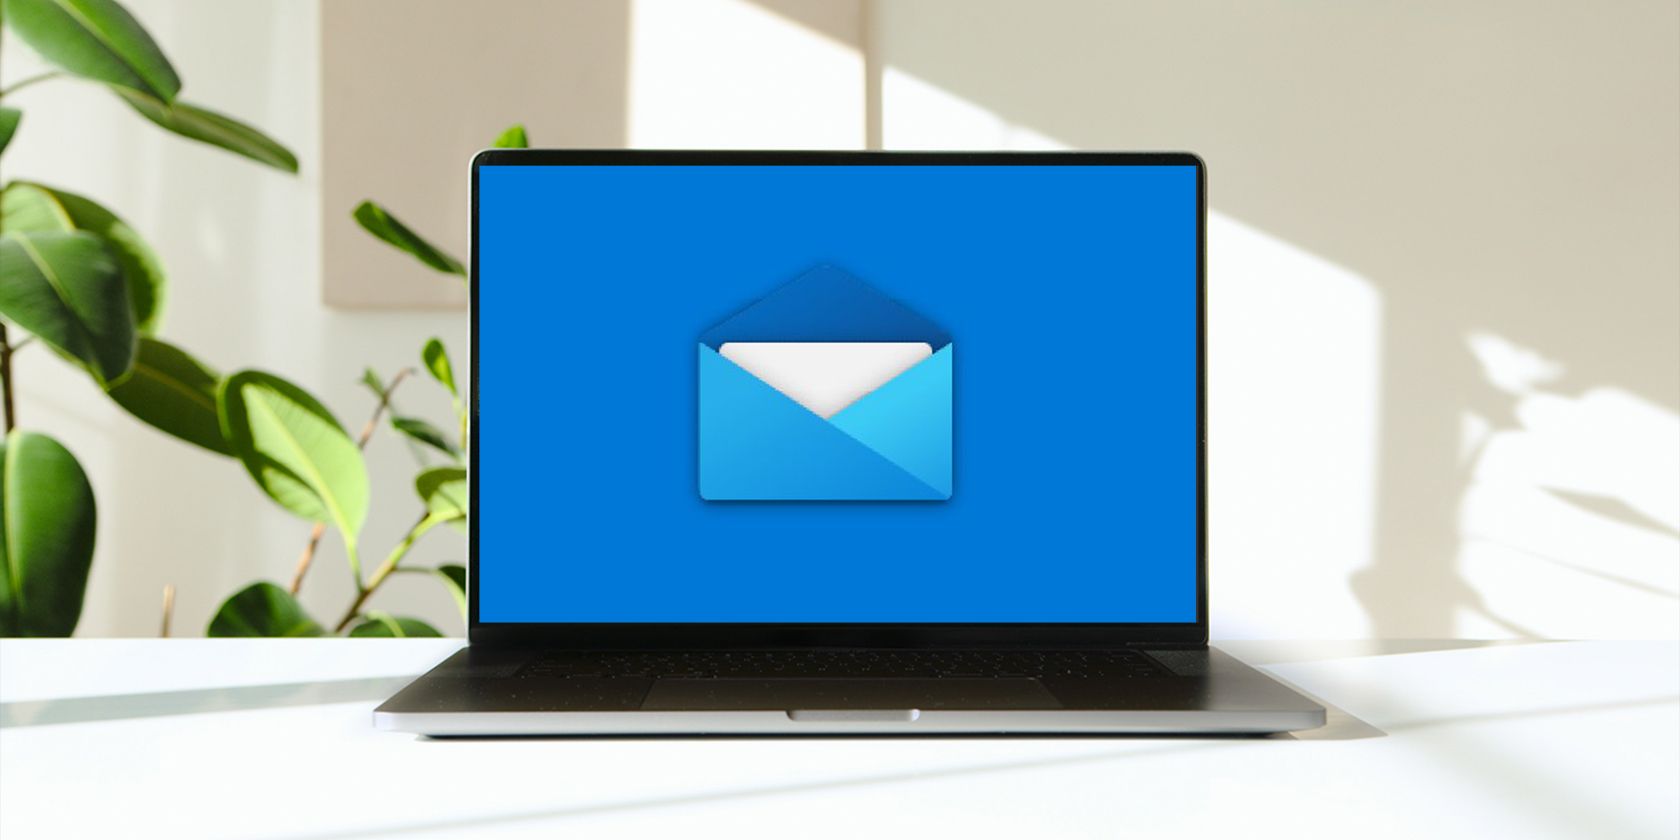 Is the Windows 10 Mail App Not Working? Here Are the Fixes